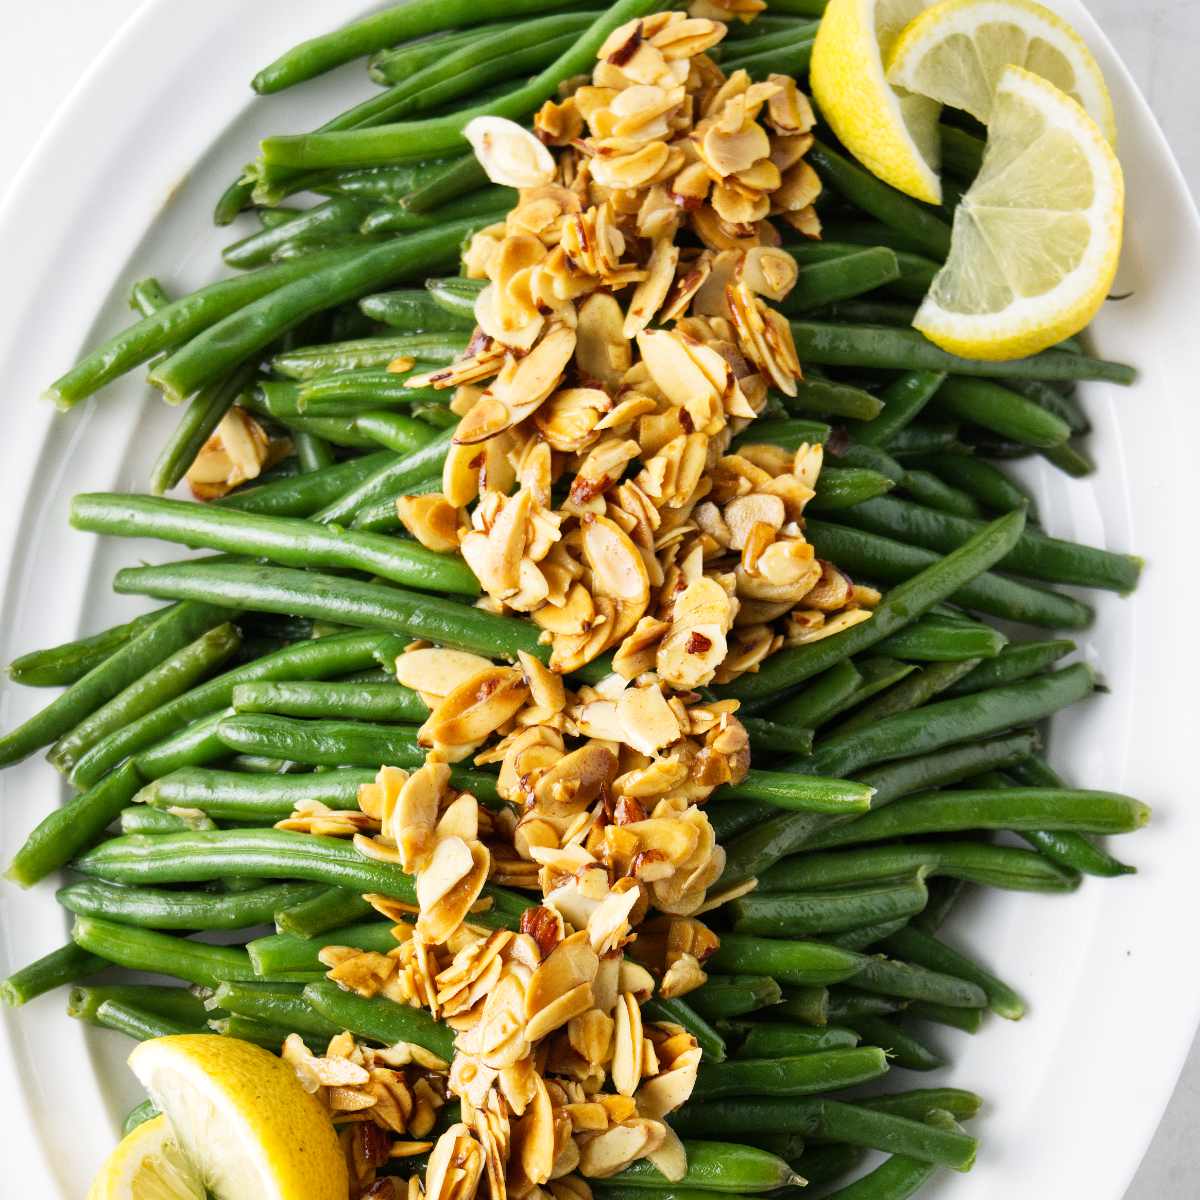 Green beans with almonds and brown butter on a serving plate with lemon slices.